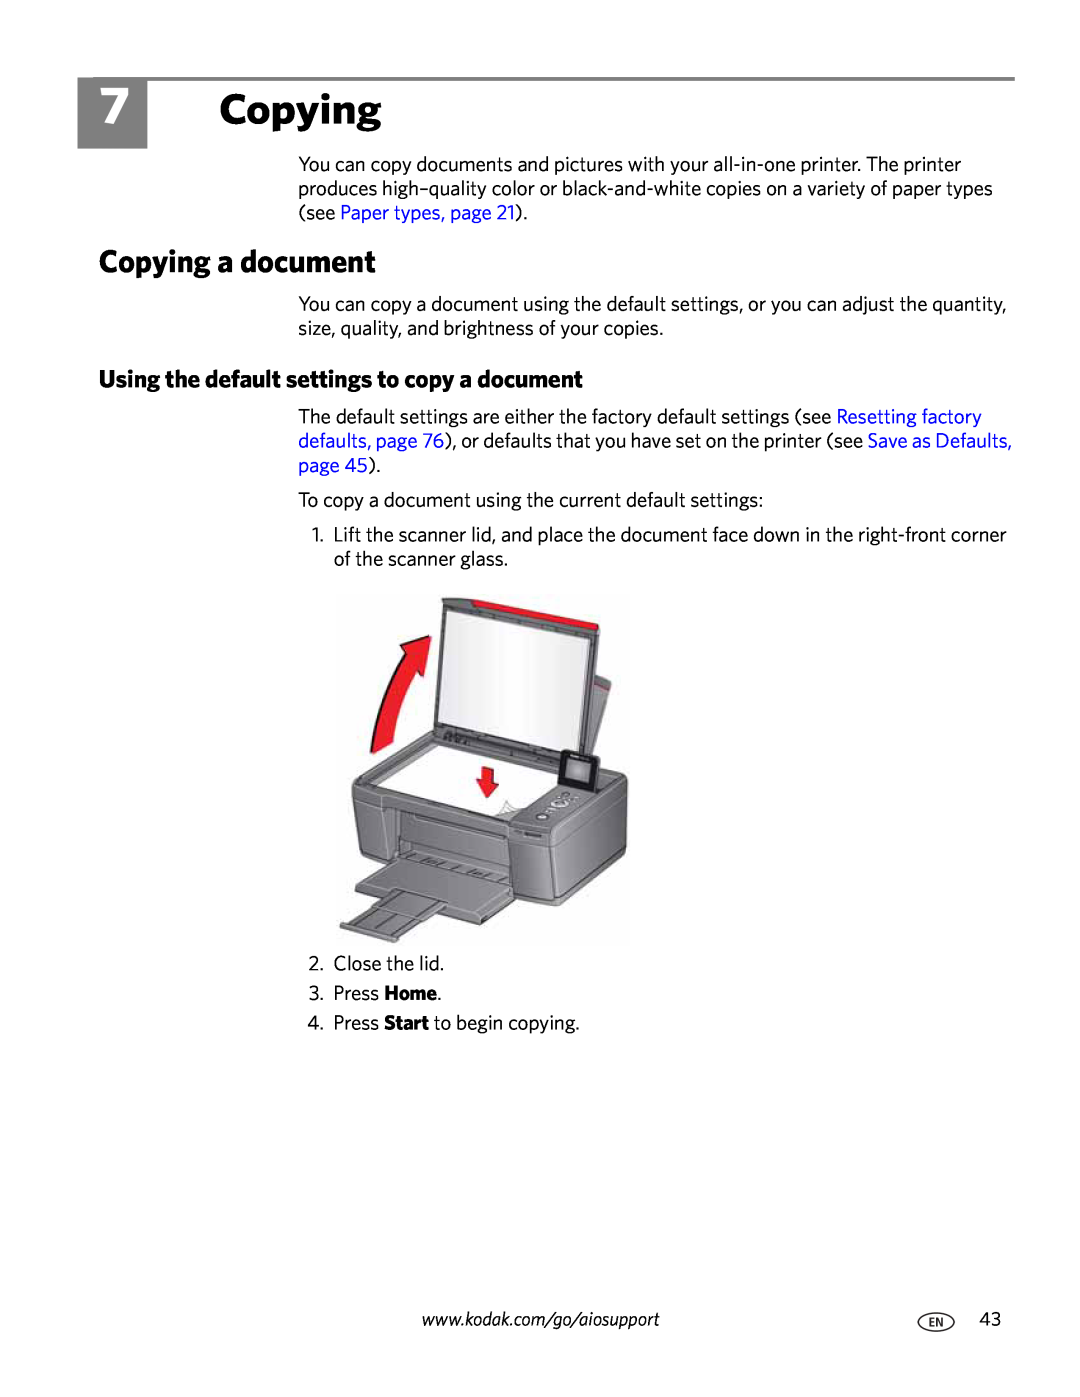 Kodak 3.1 manual Copying a document, Using the default settings to copy a document 